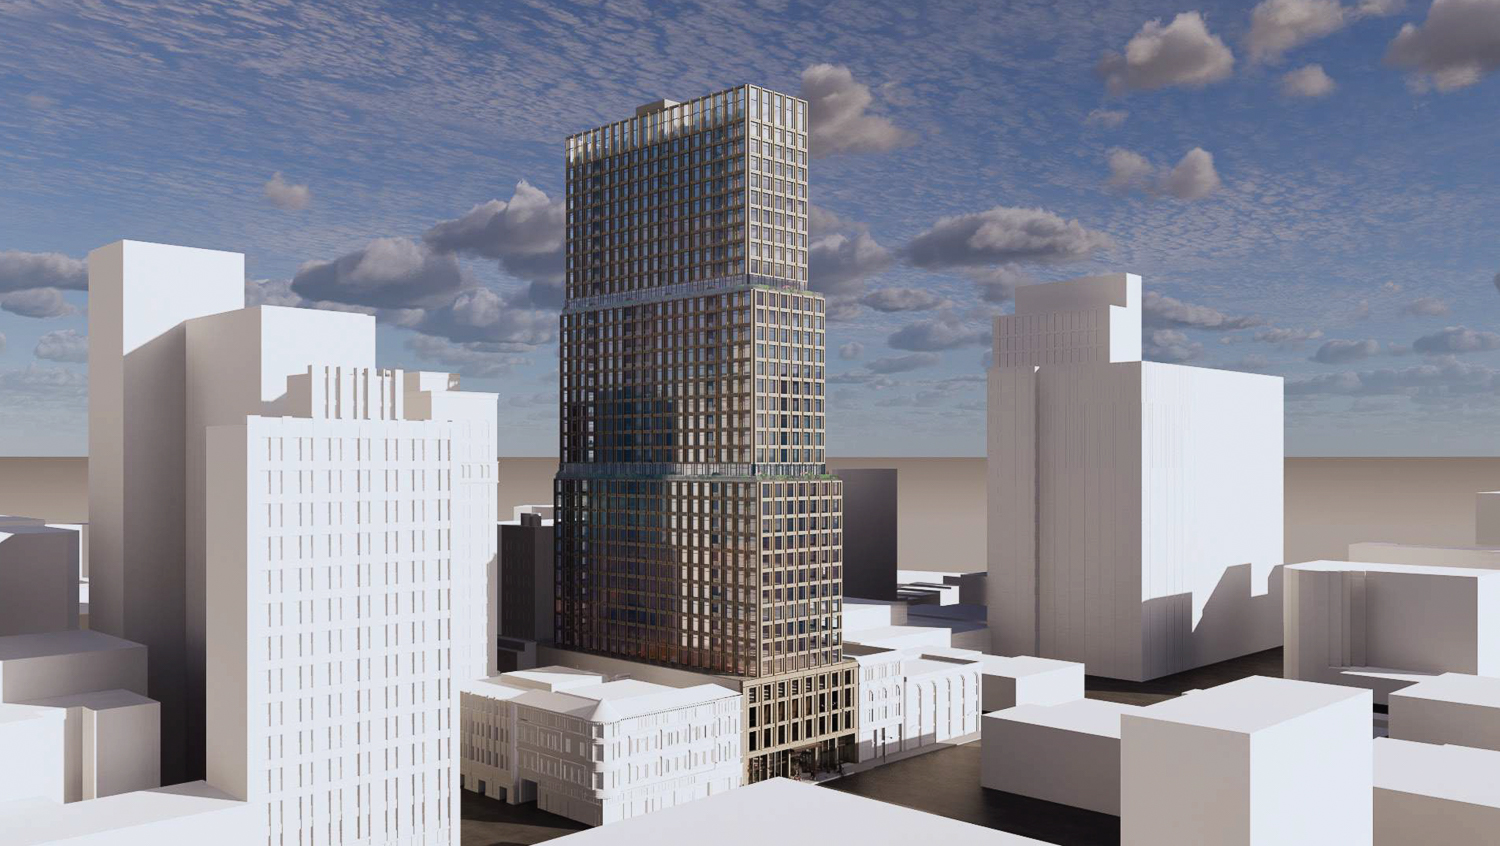 1431 Franklin Street residential scenario looking northwest, rendering by Large Architecture